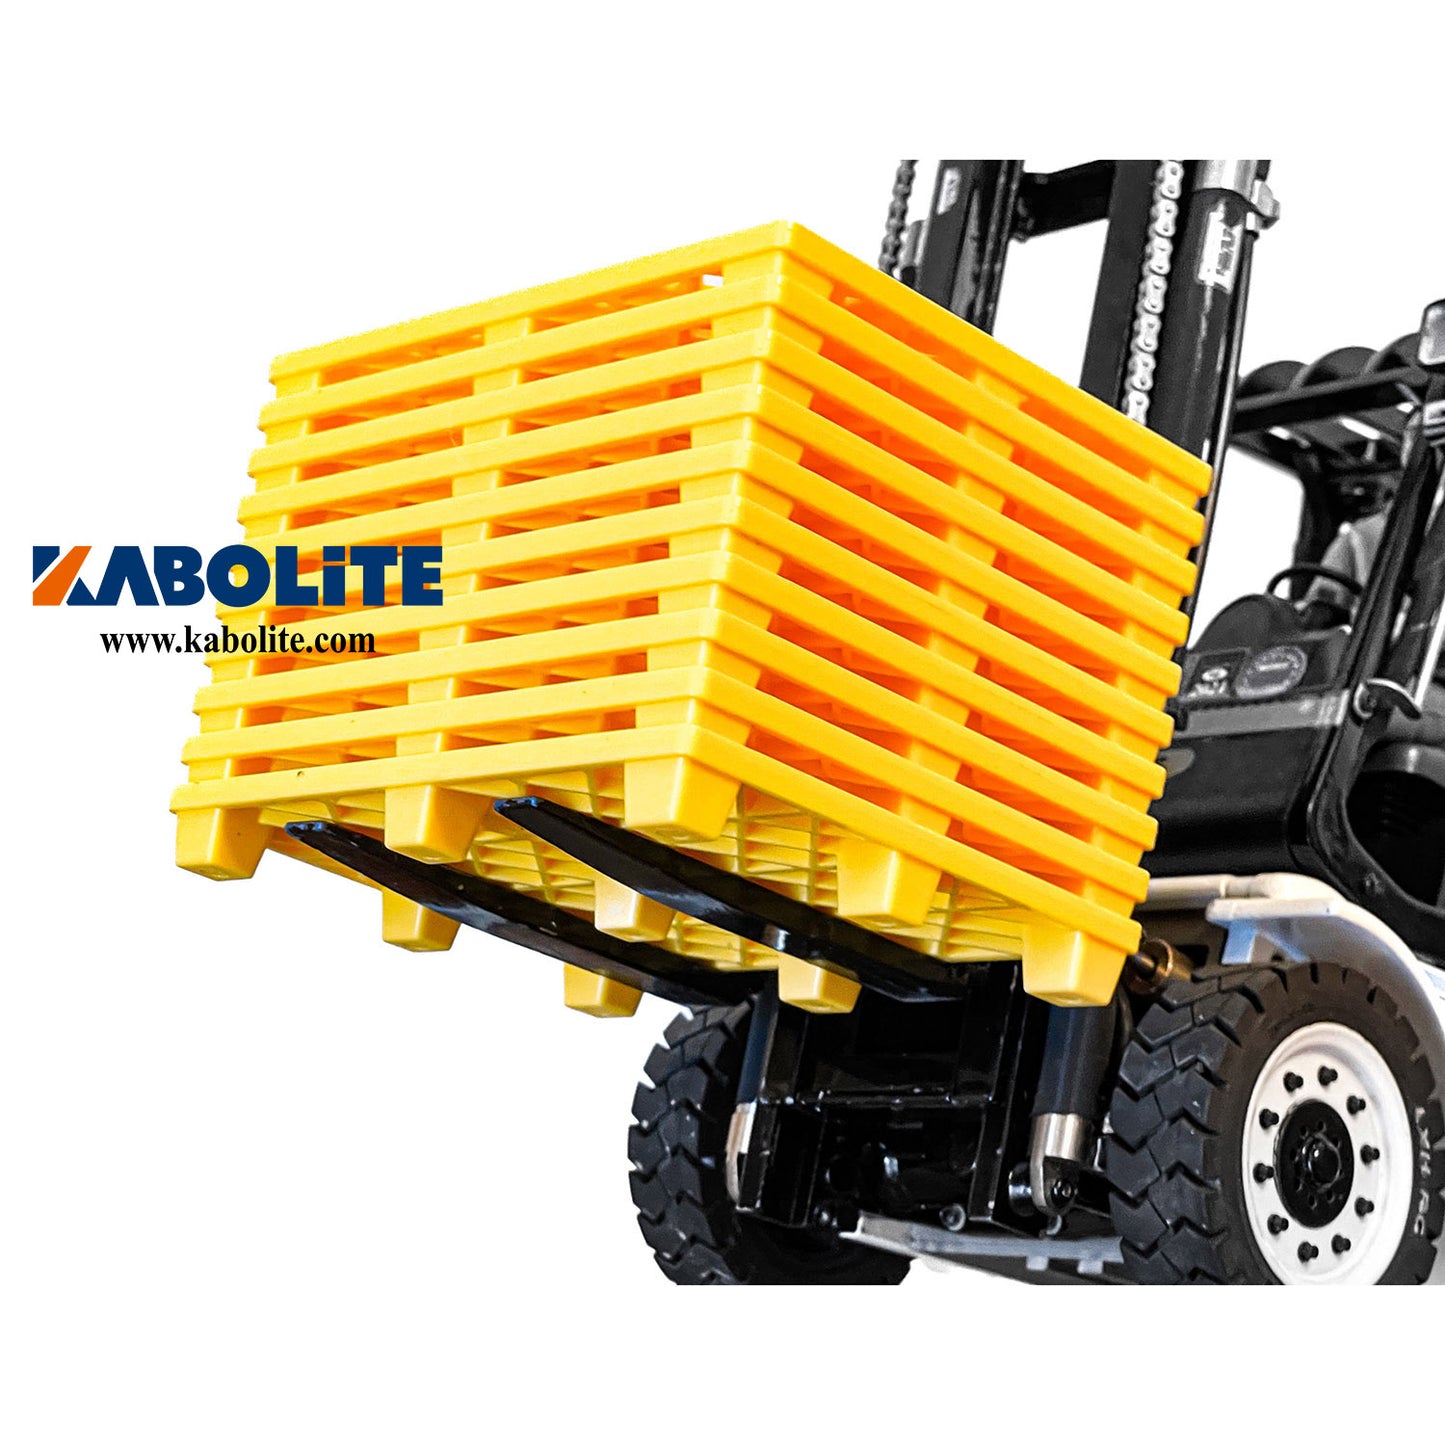 Kabolite 10pcs Pallets RC Car Accessories for For TAMIYA Remote Control Trucks Forklift LESU 1/14 1/16 Truck RC Trucks